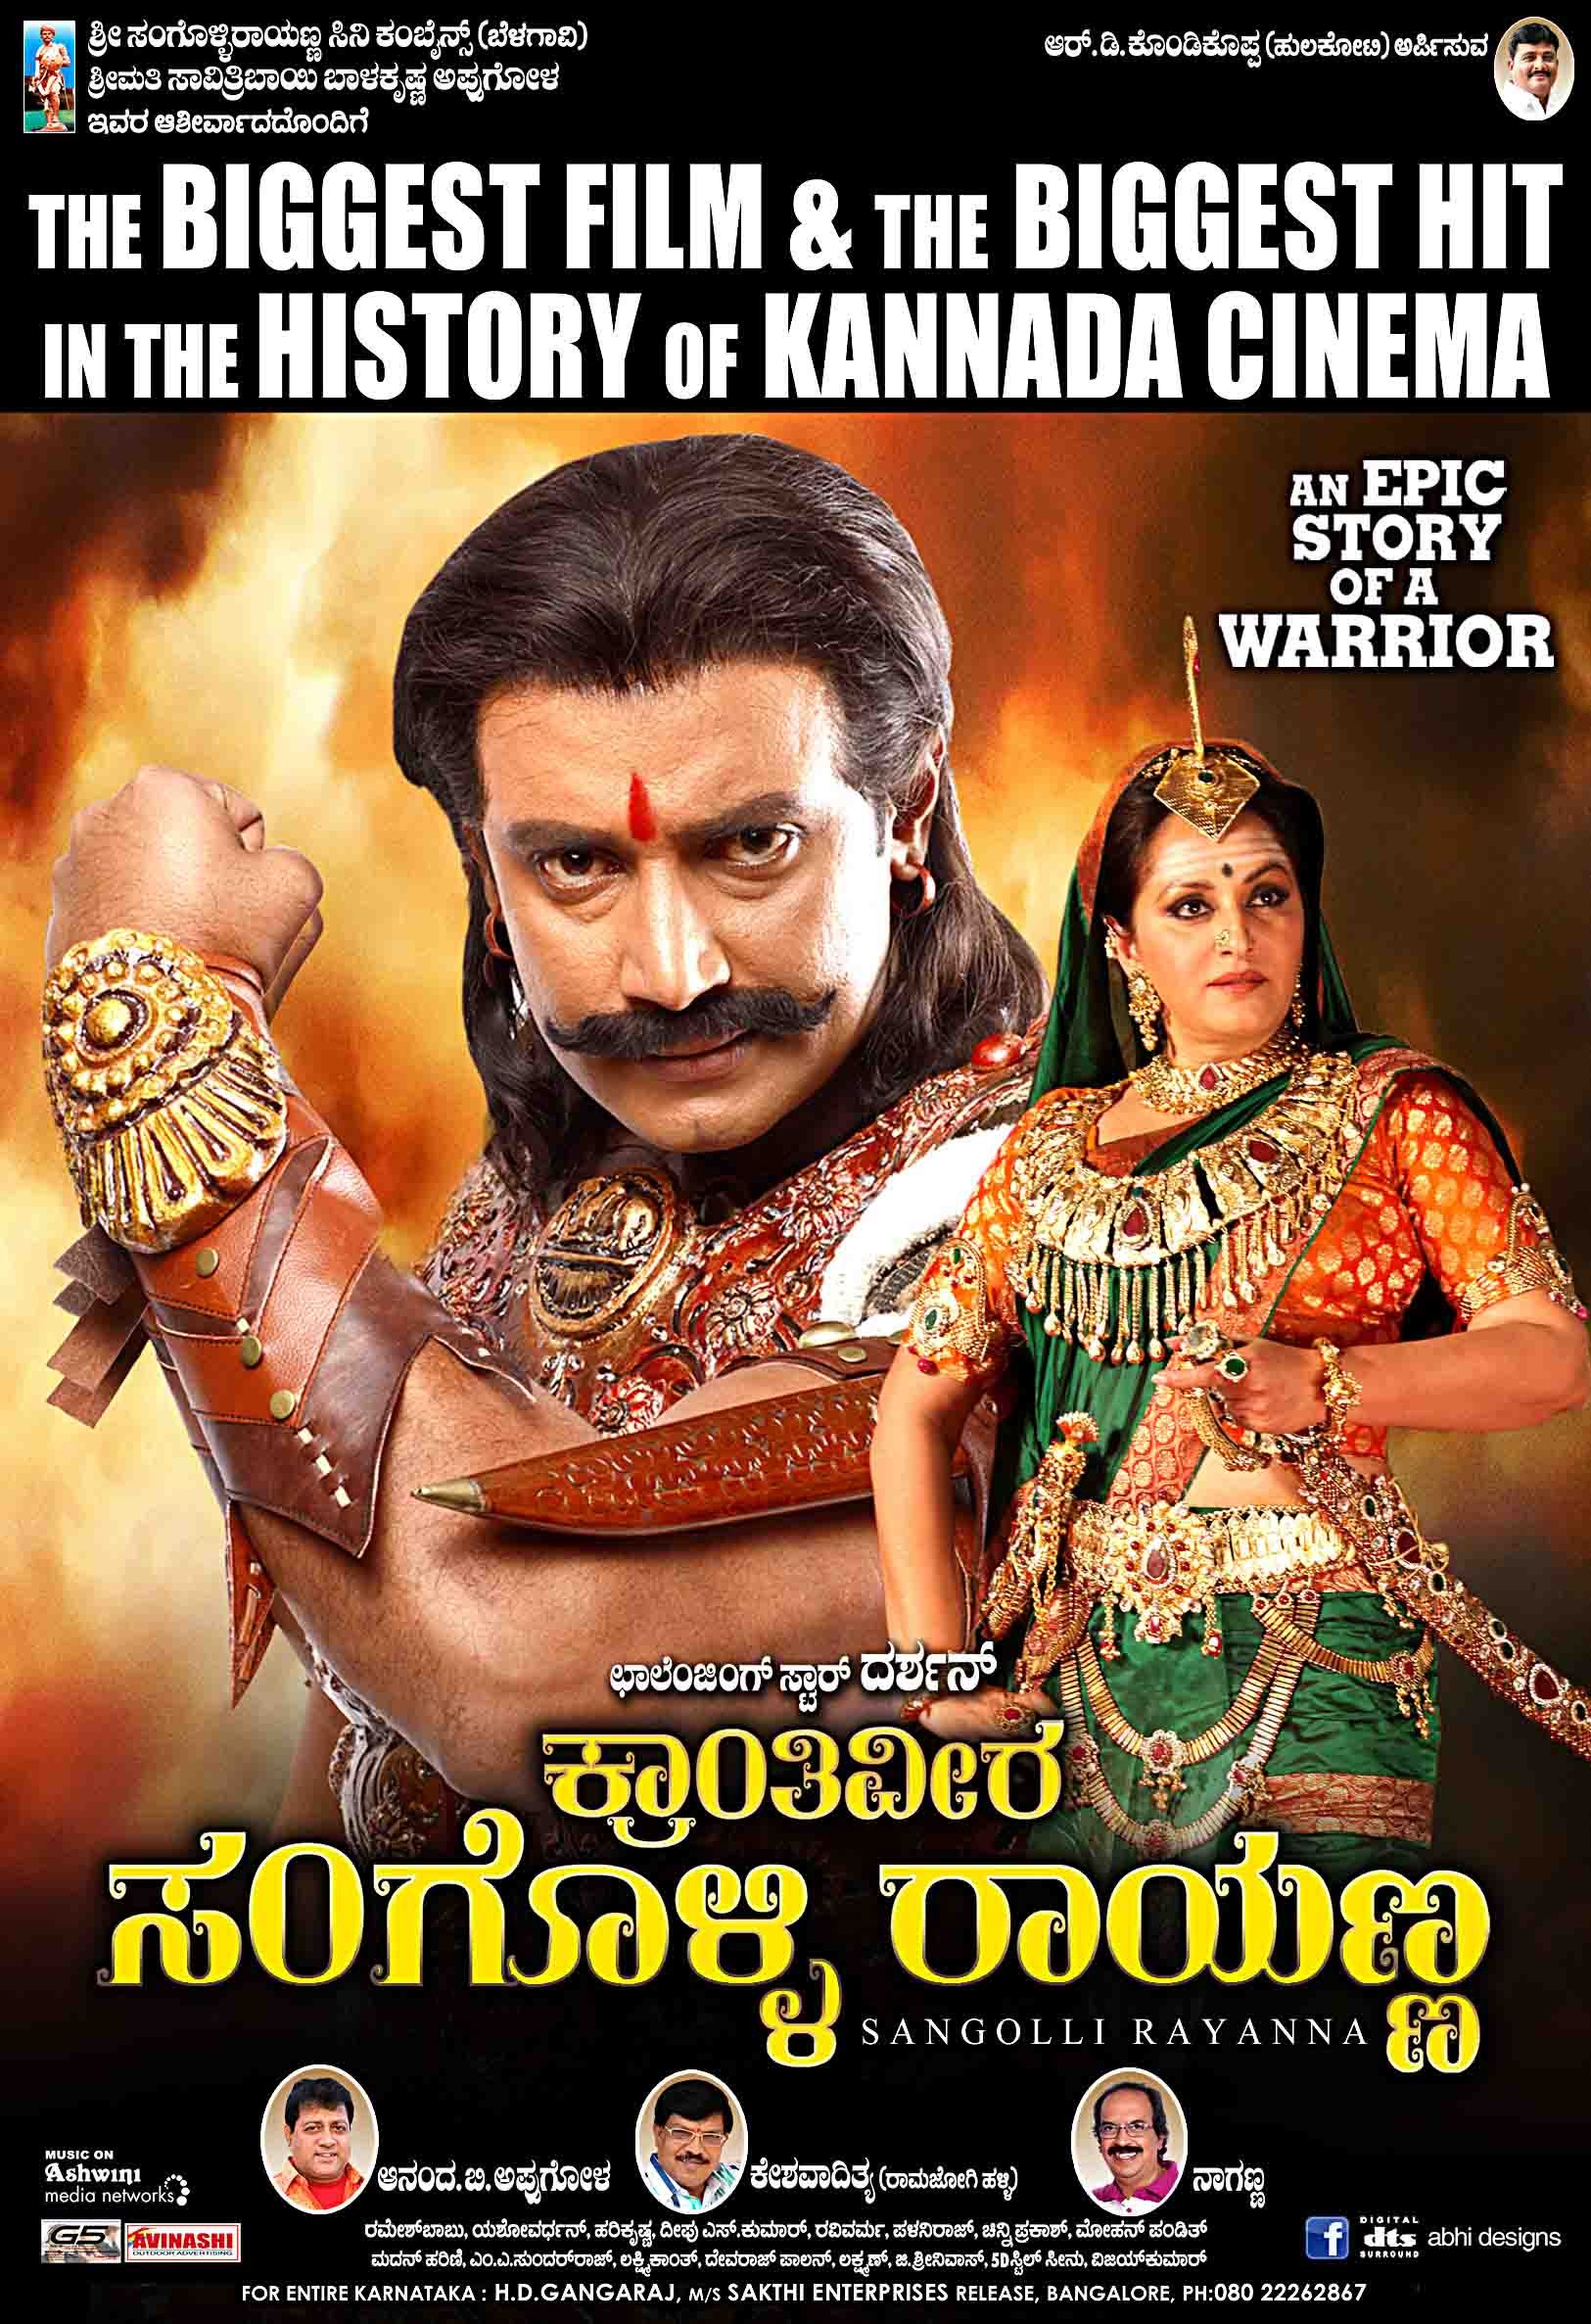 Mega Sized Movie Poster Image for Sangolli Rayanna (#53 of 79)